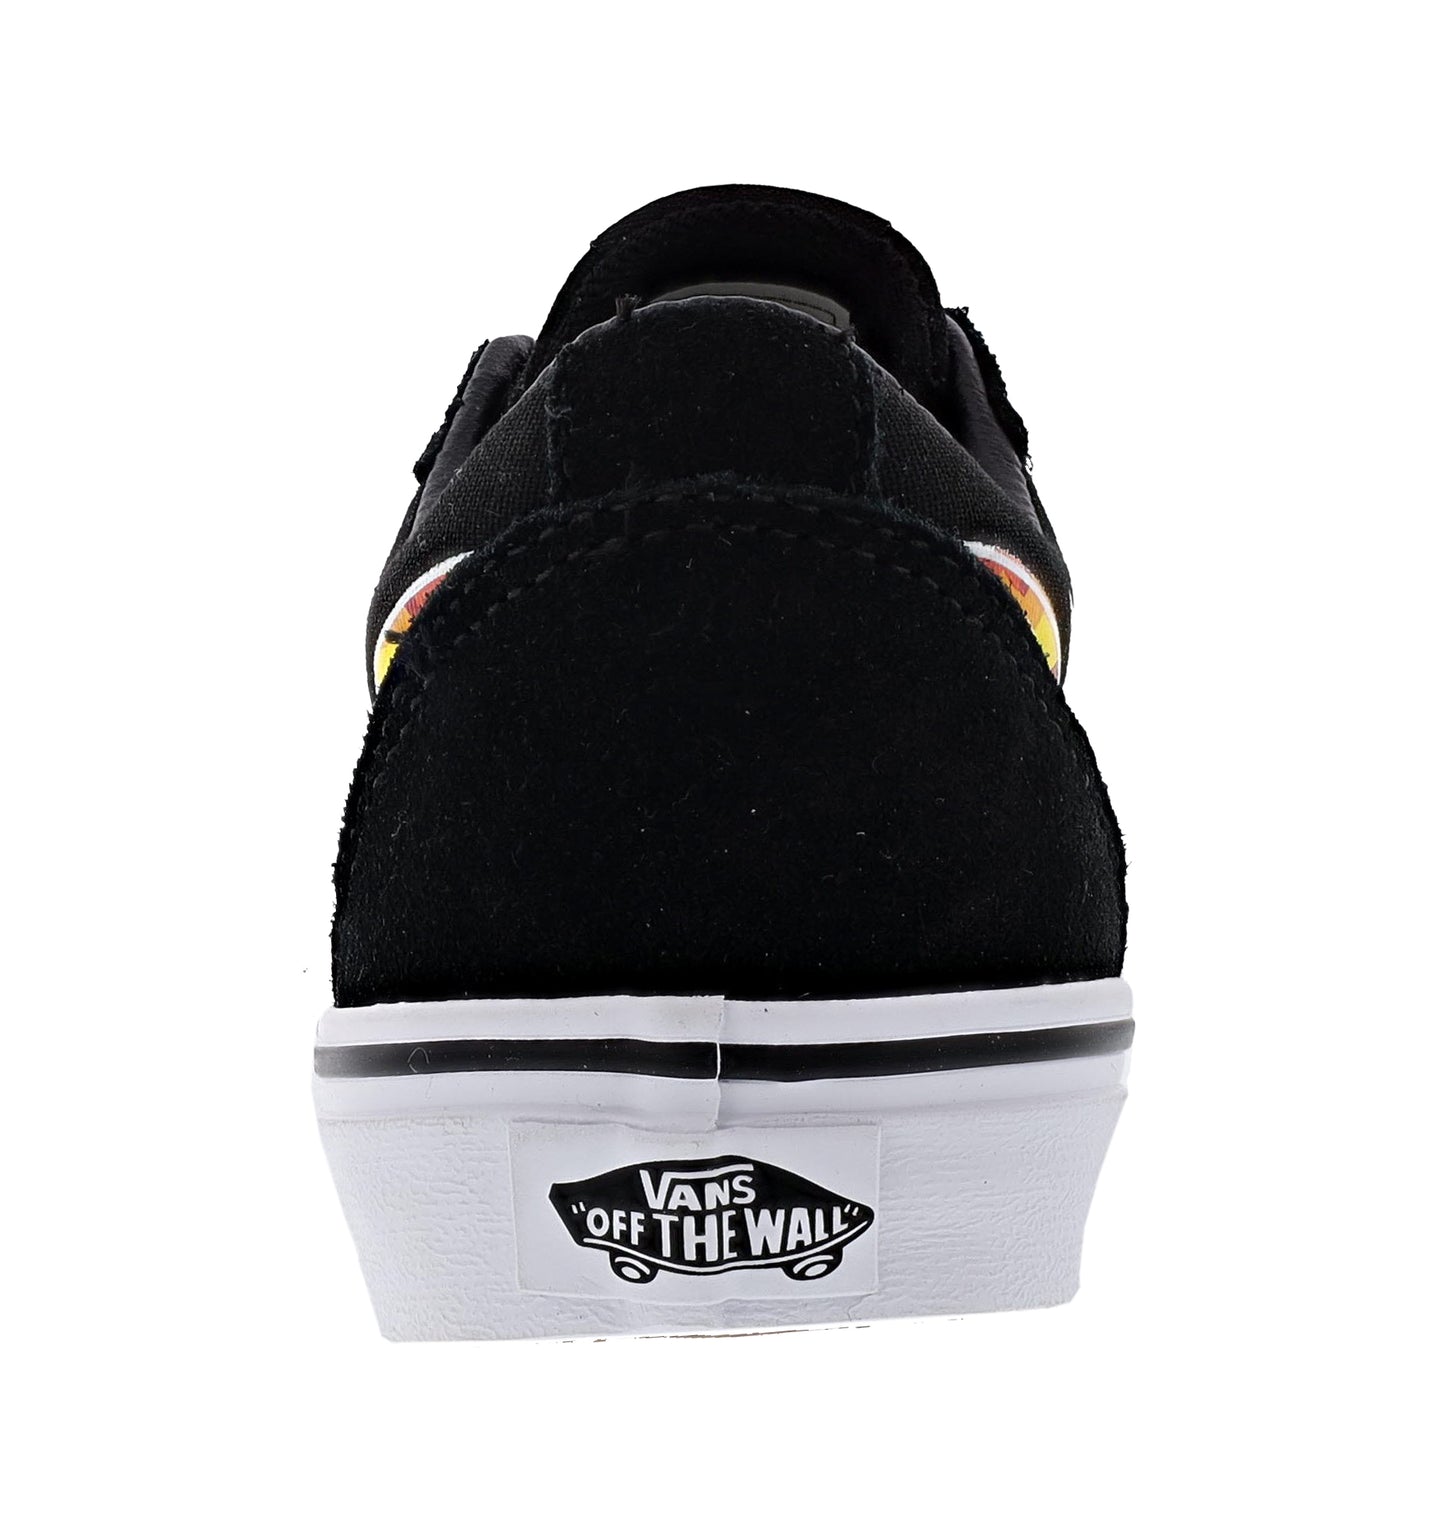 
                  
                    Black heel with black and white artwork of Vans "Off the Wall" on sole of Red, Orange and Yellow Flame Camo on Black/White Van Sneakers.
                  
                